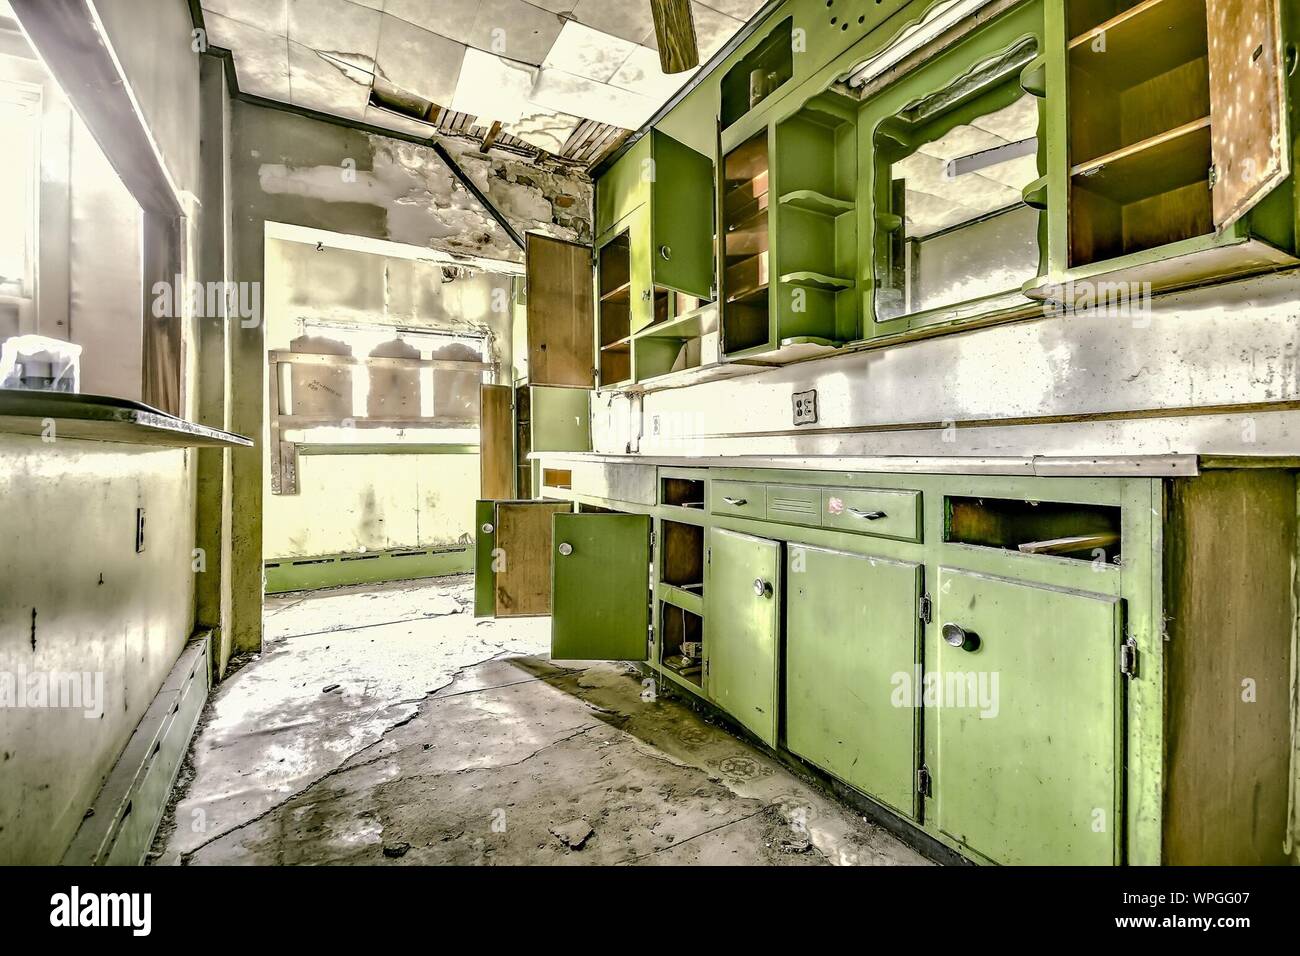 Abandoned Domestic Kitchen With Cabinets Stock Photo